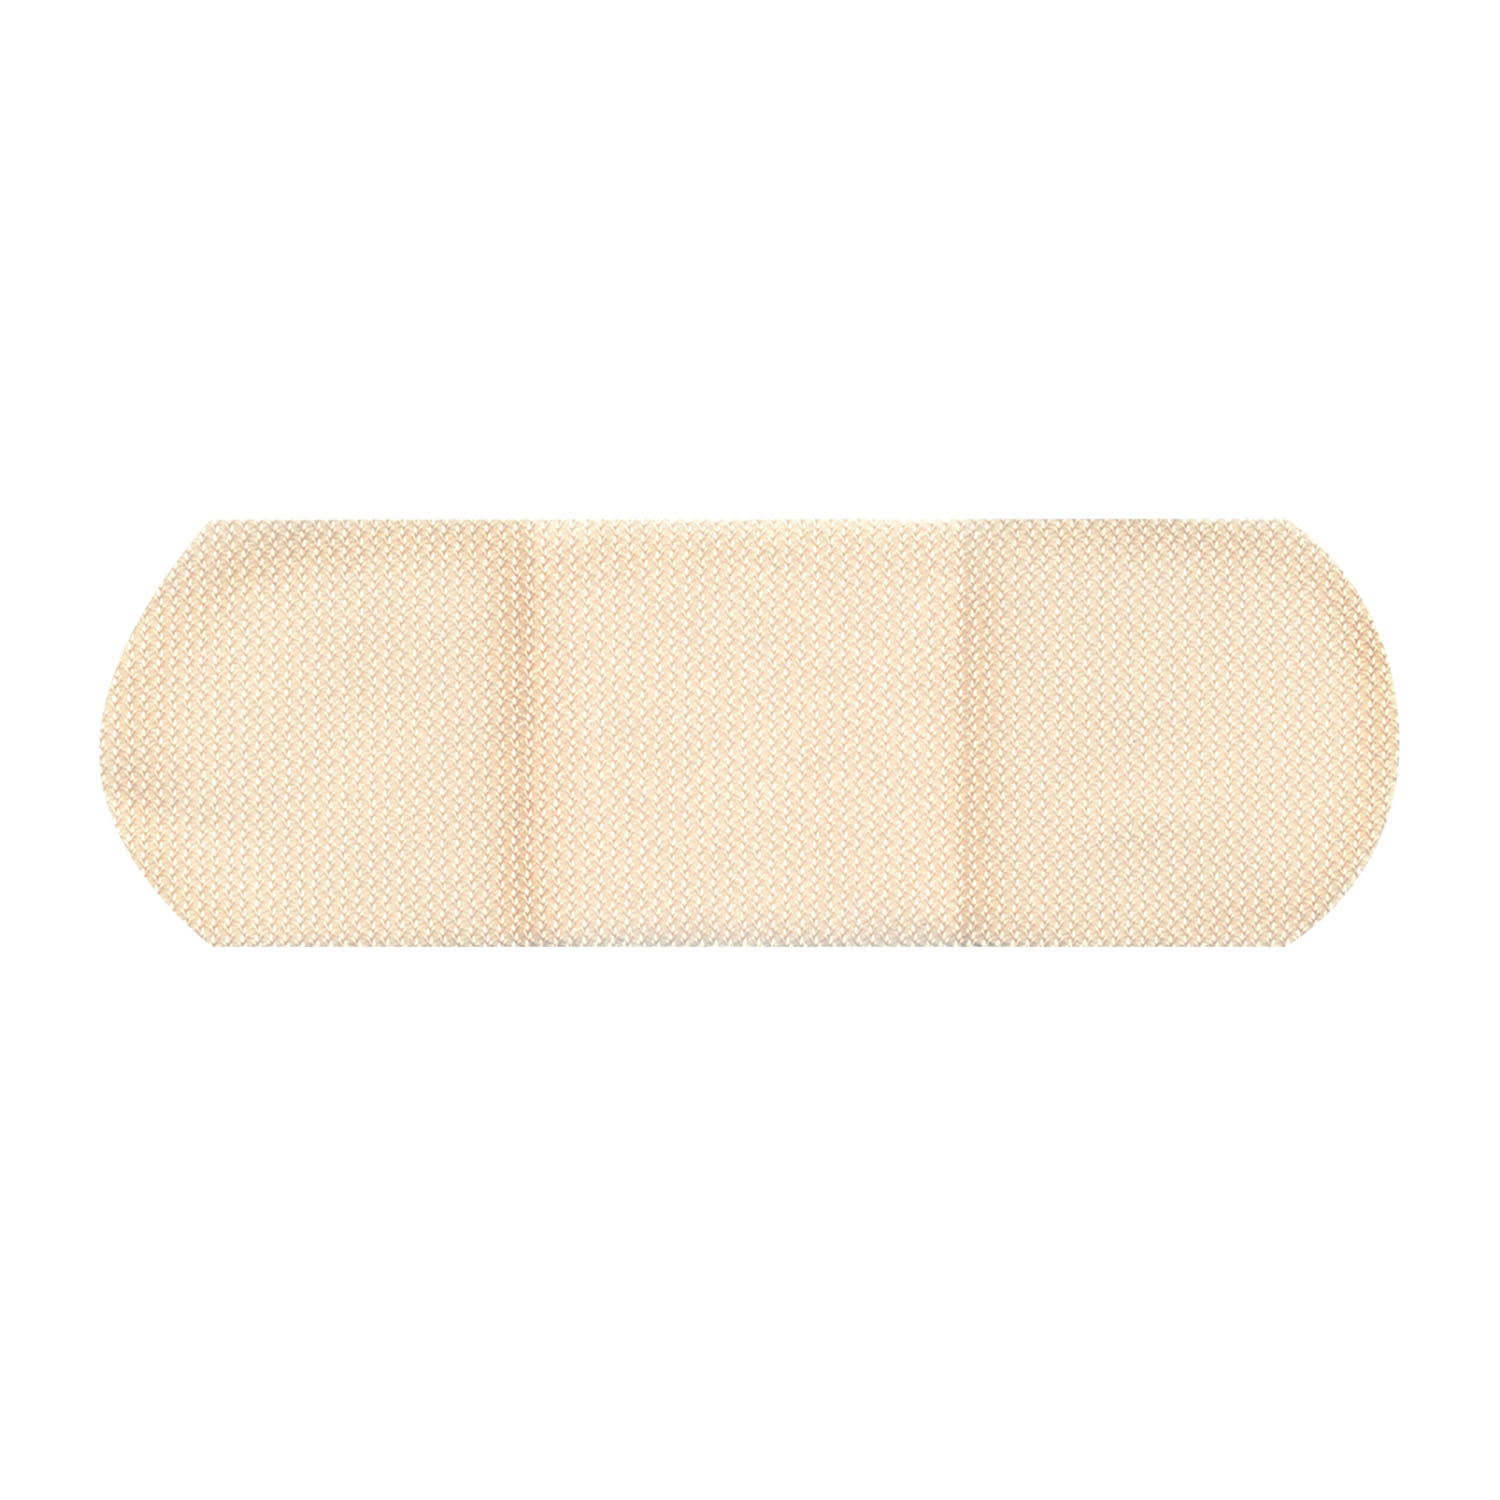 DUKAL FIRST AID ADHESIVE BANDAGES : 1790033 BX                       $2.99 Stocked